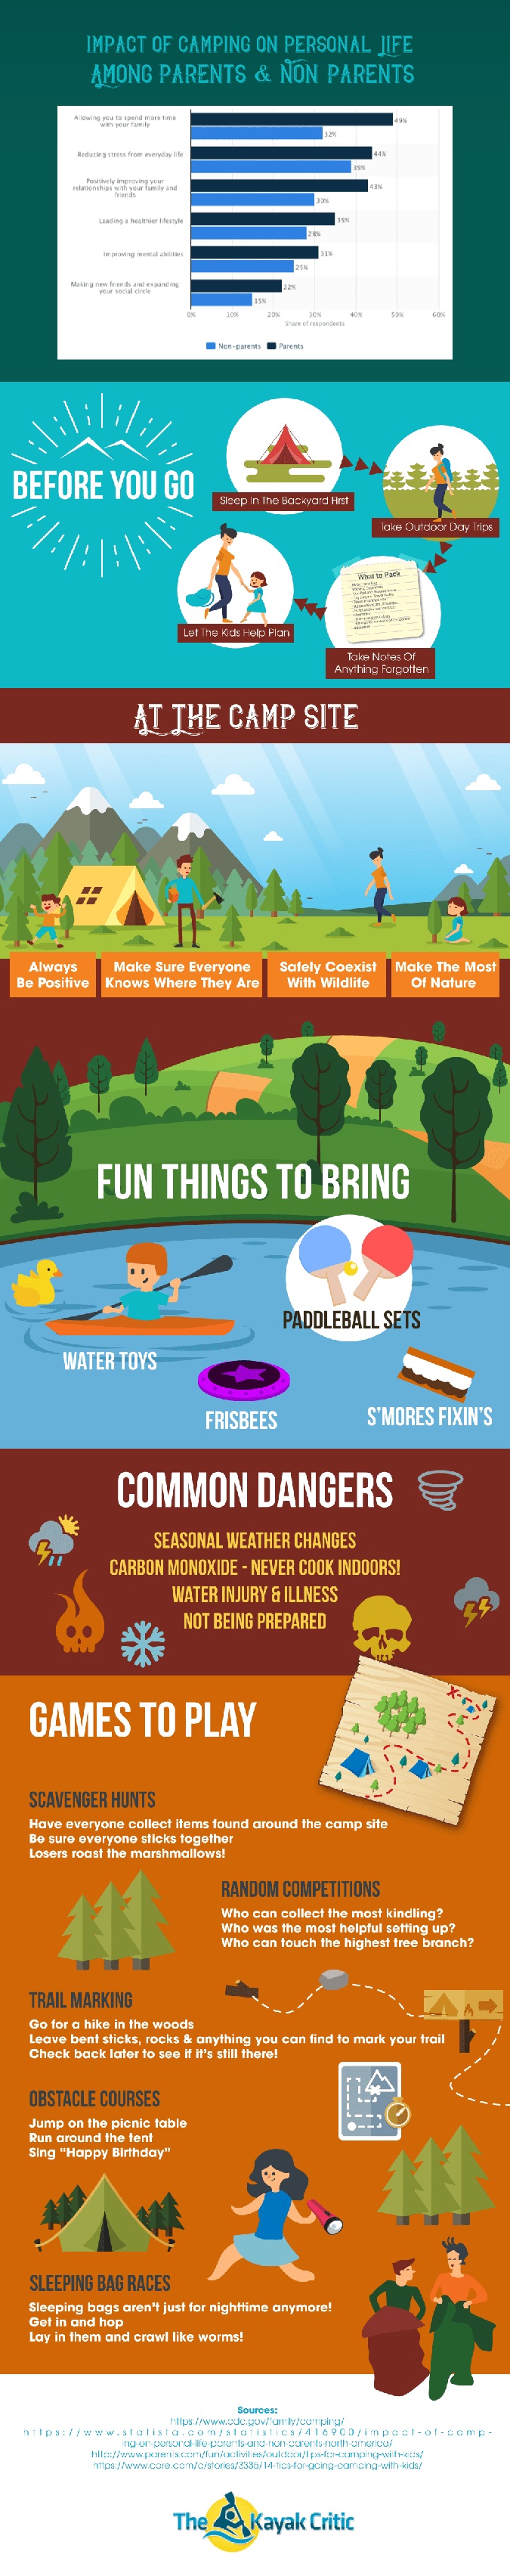 How To Survive Camping With Kids